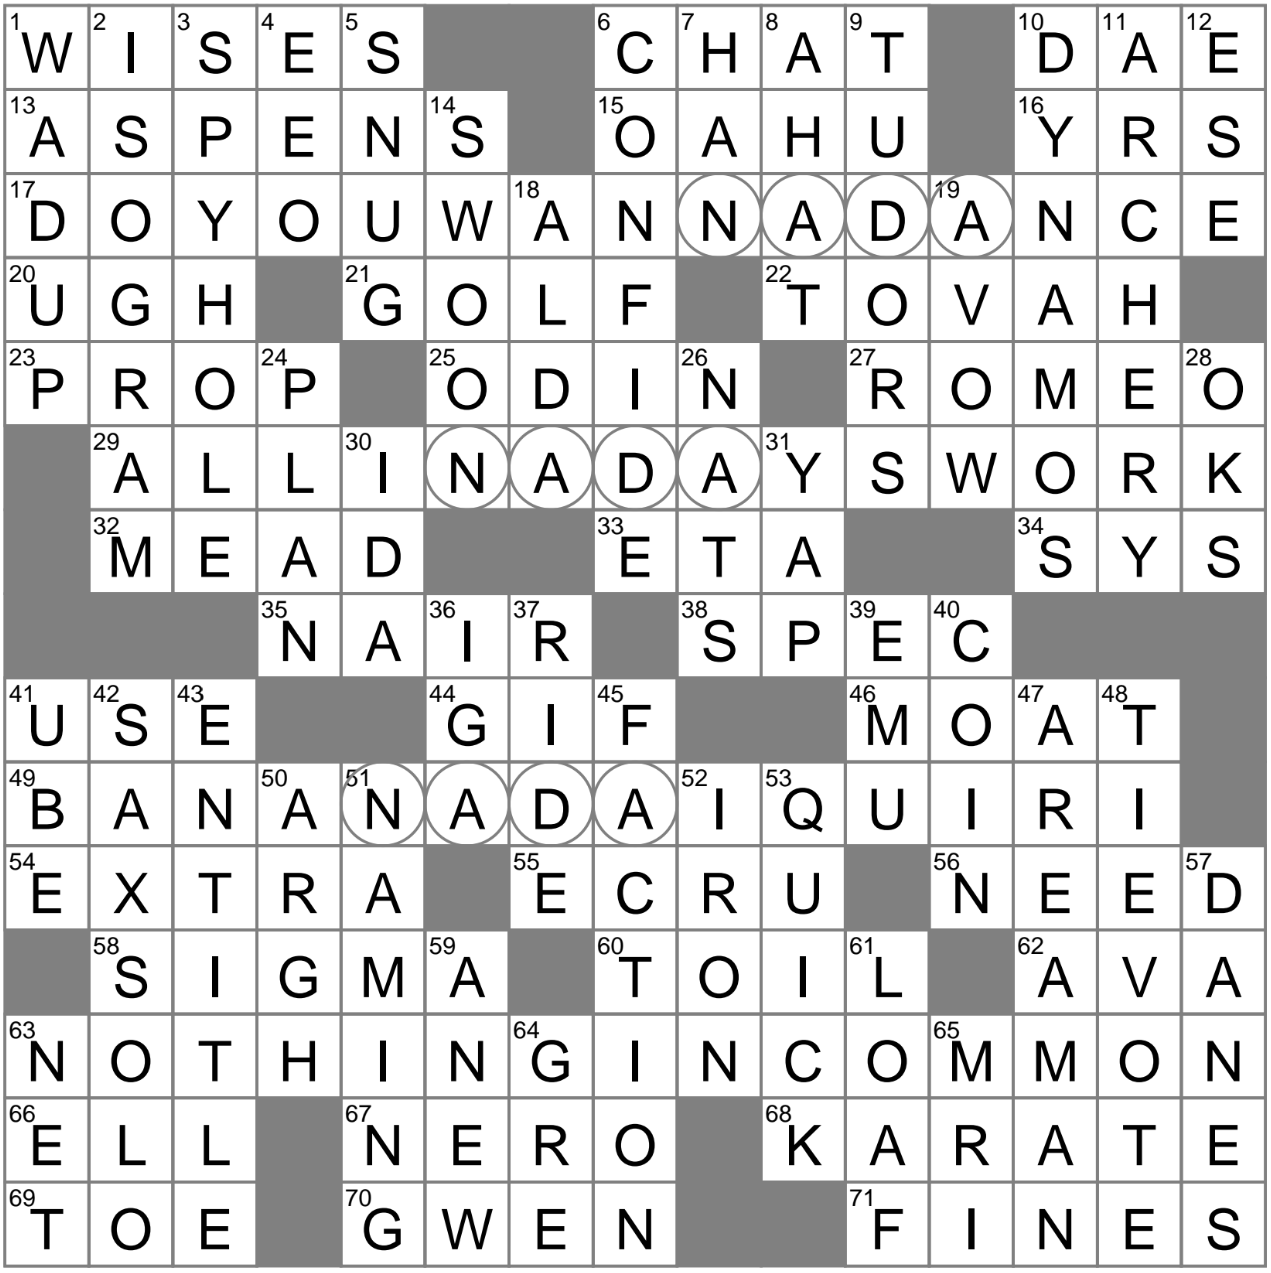 NYT Crossword Answers: Actress Foster of The Silence of the Lambs